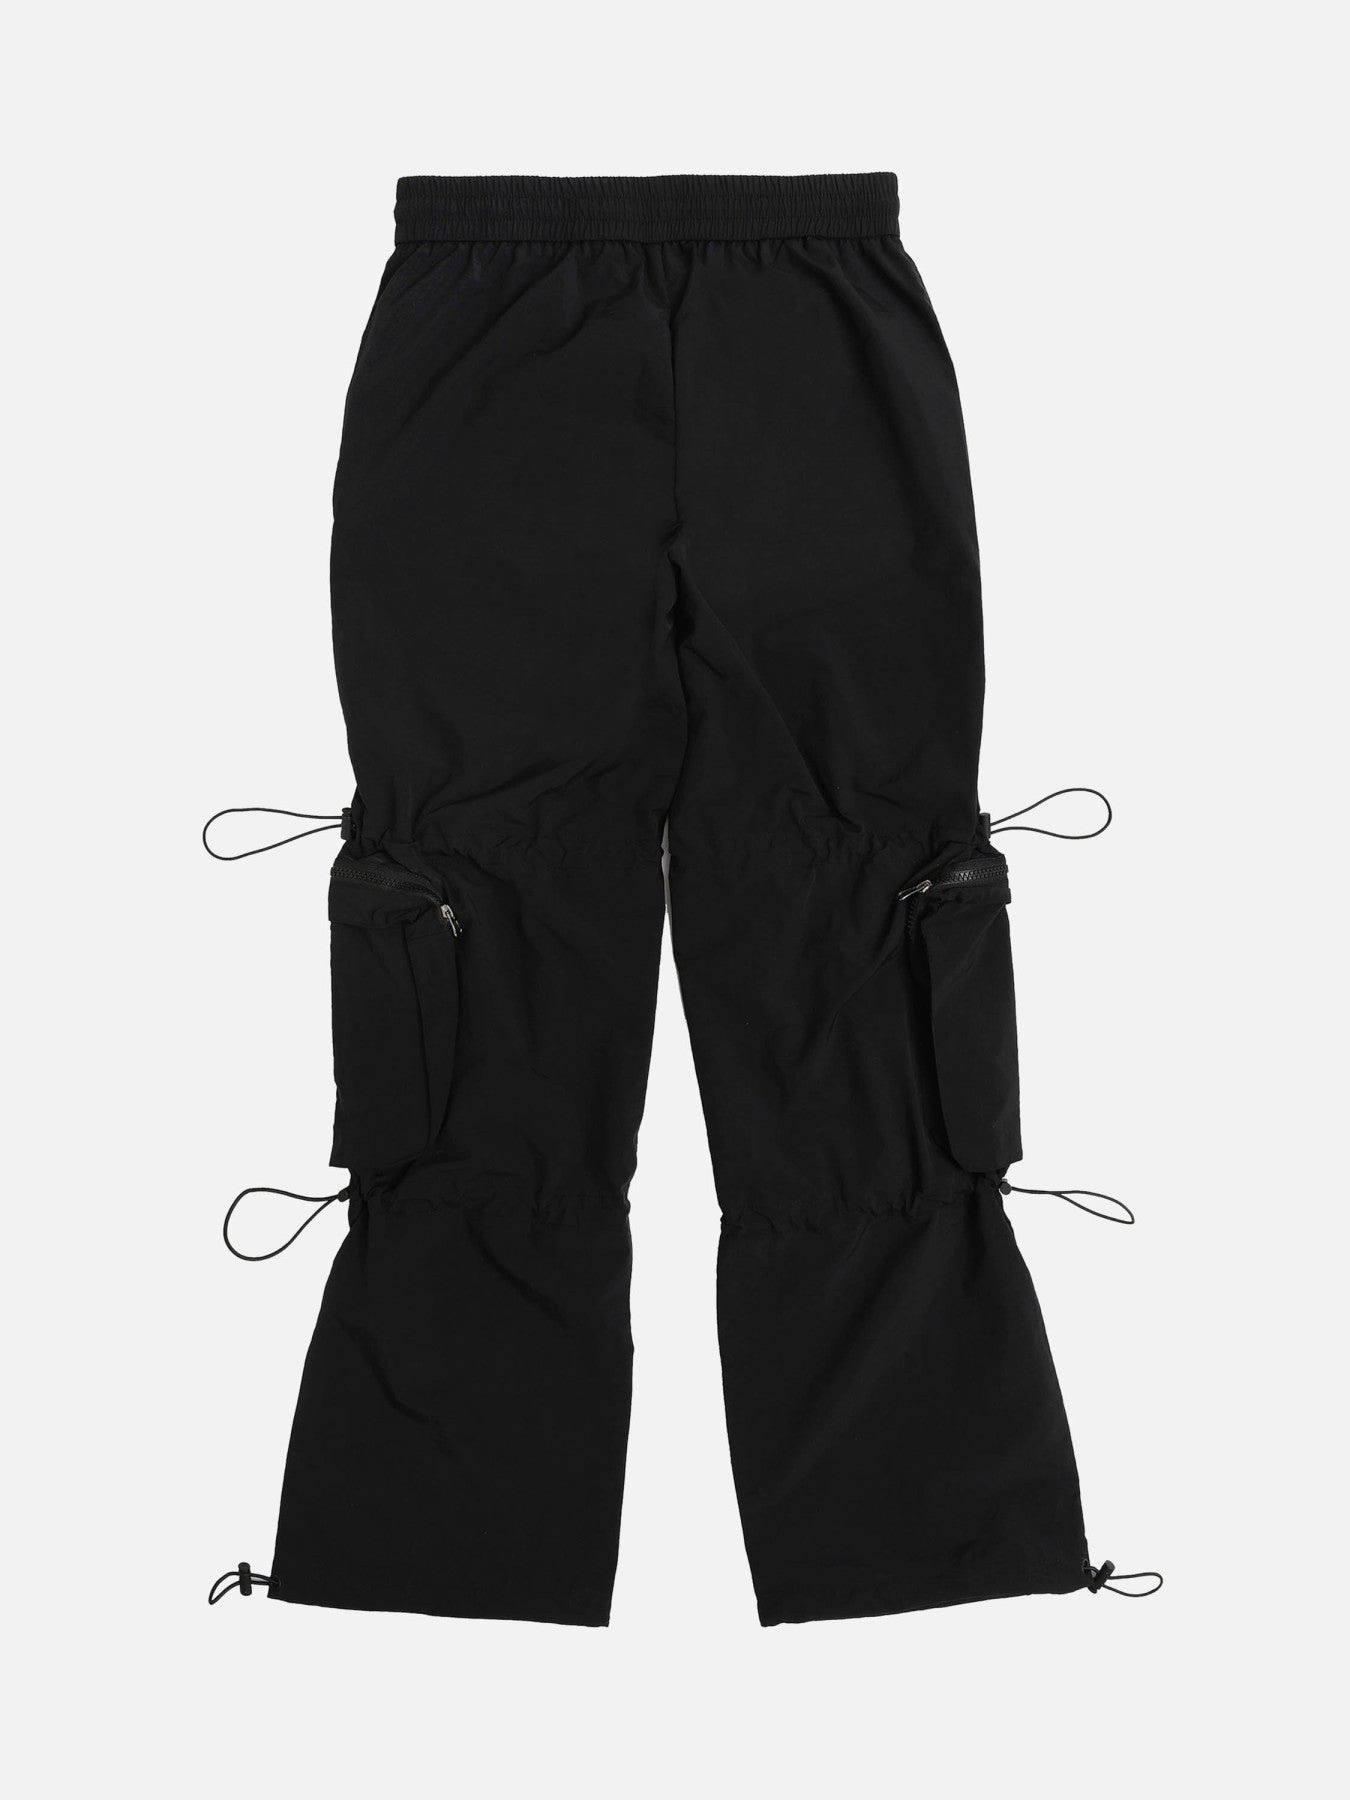 The Supermade Retro Loose-fitting Work Casual Pants